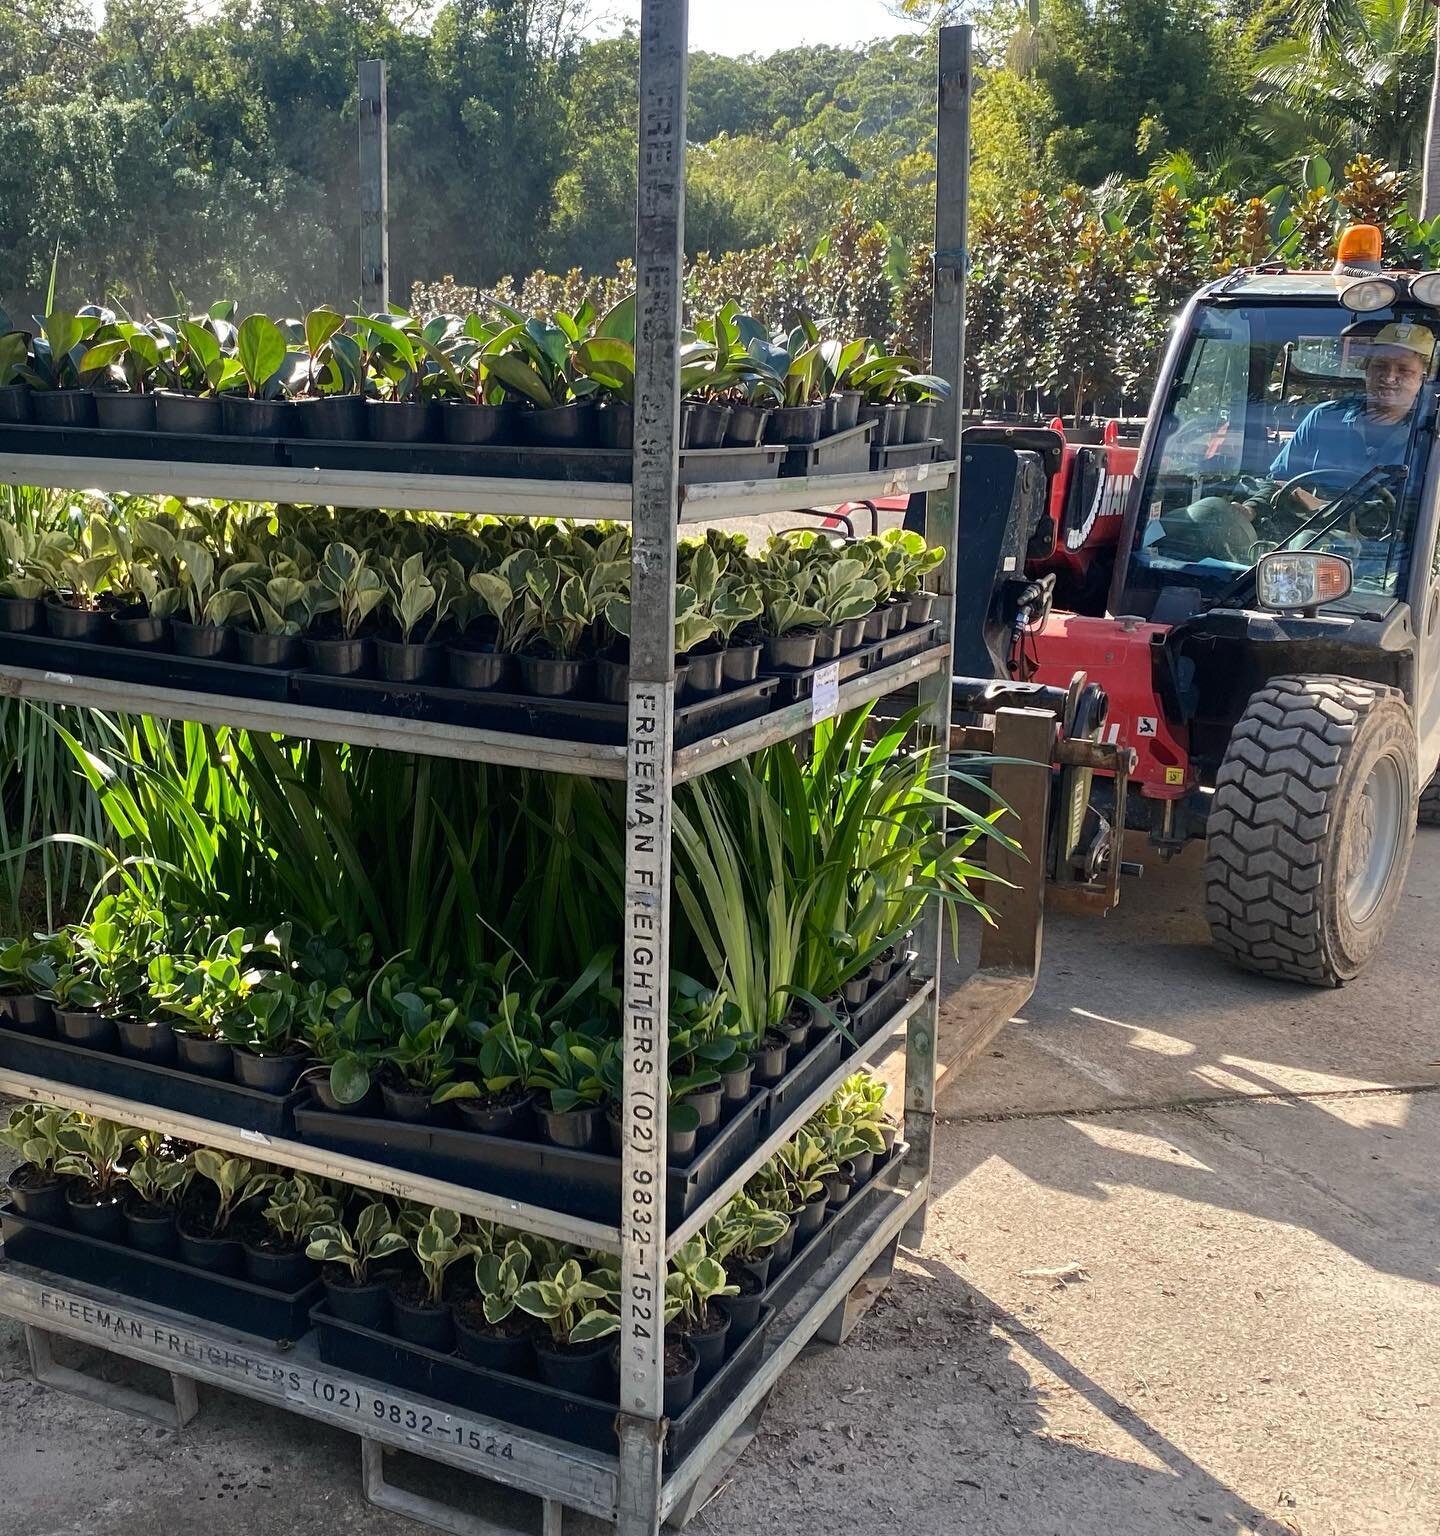 It&rsquo;s very gratifying to supply plants to green urban spaces. Another contract grow for vertical gardens off to Sydney and Brisbane. Mass plantings like this are neat and aesthetically pleasing. Using the toughest plants for a full sun wall, pep